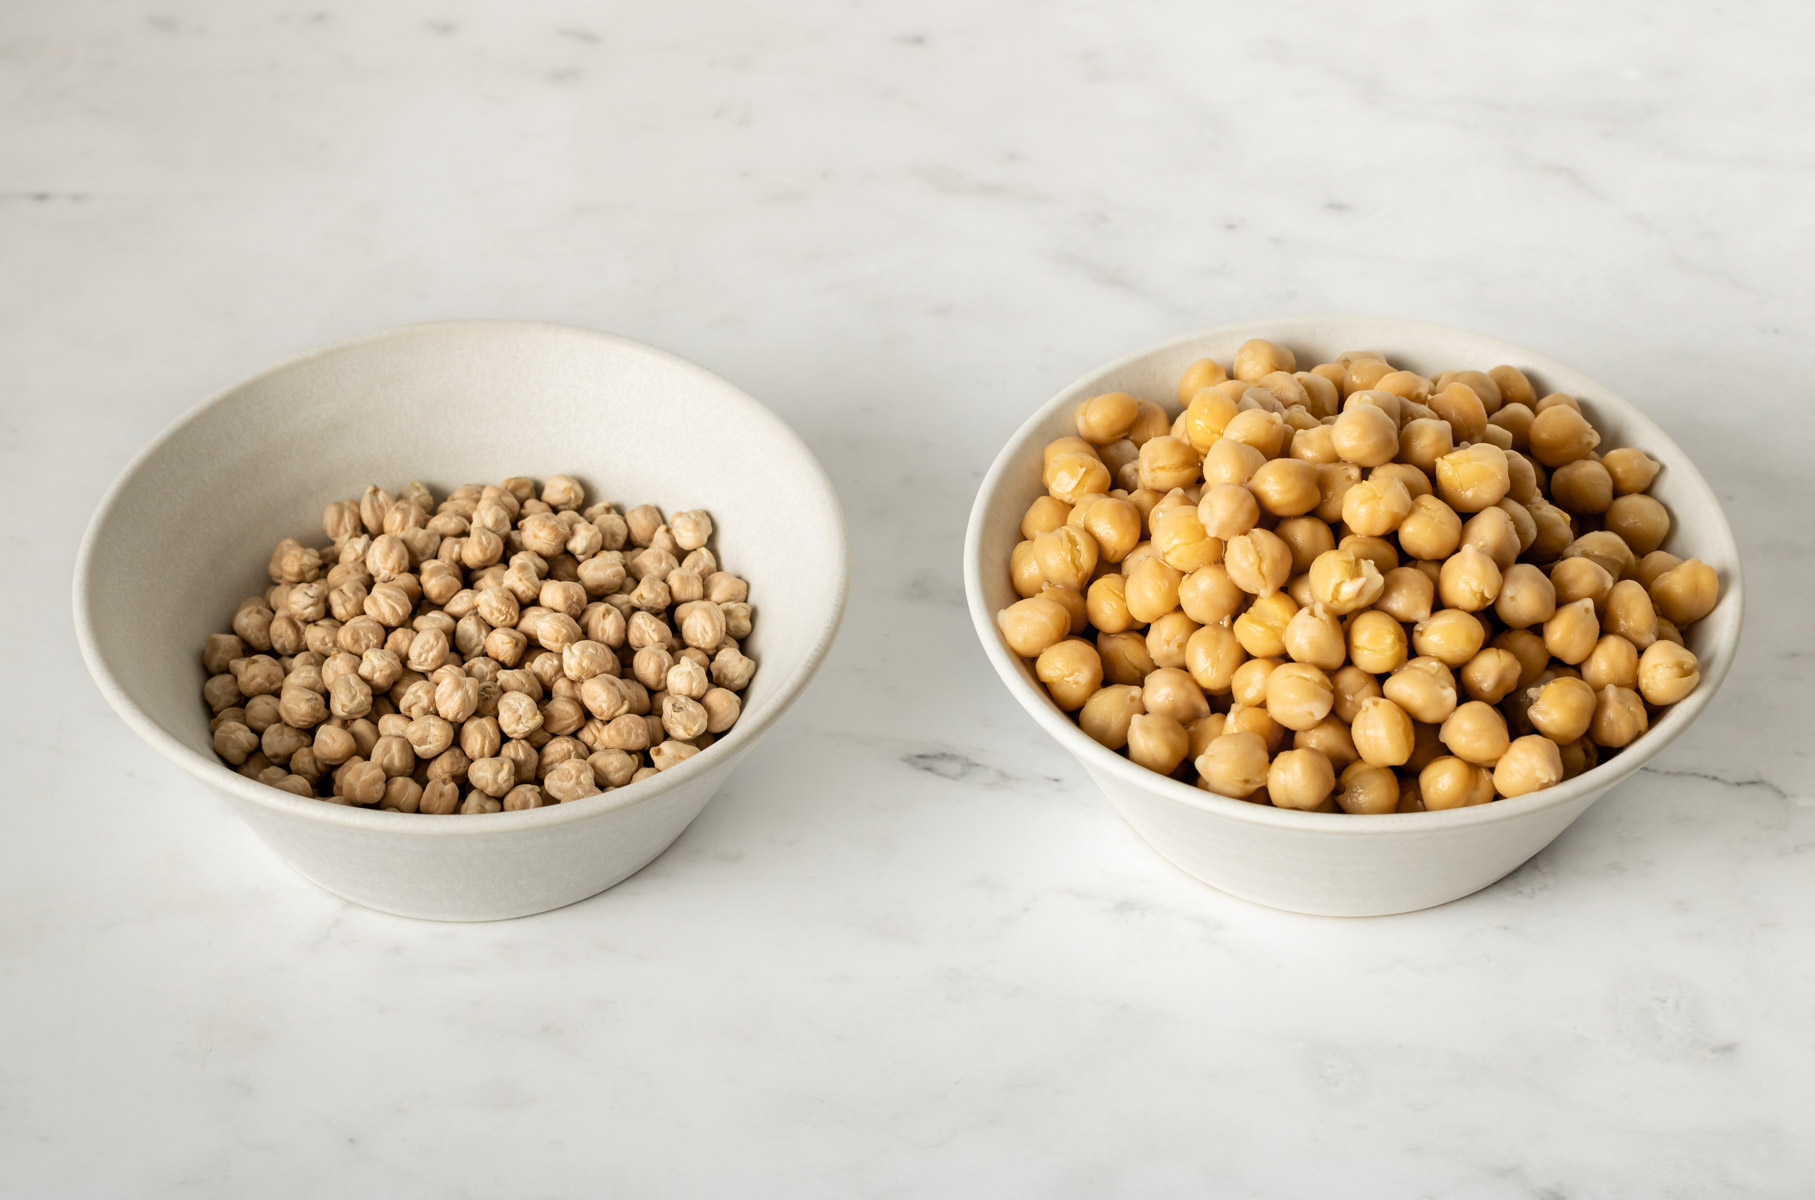 a bowl of dried chickpeas next to a bowl of cooked chickpeas for volume comparison.